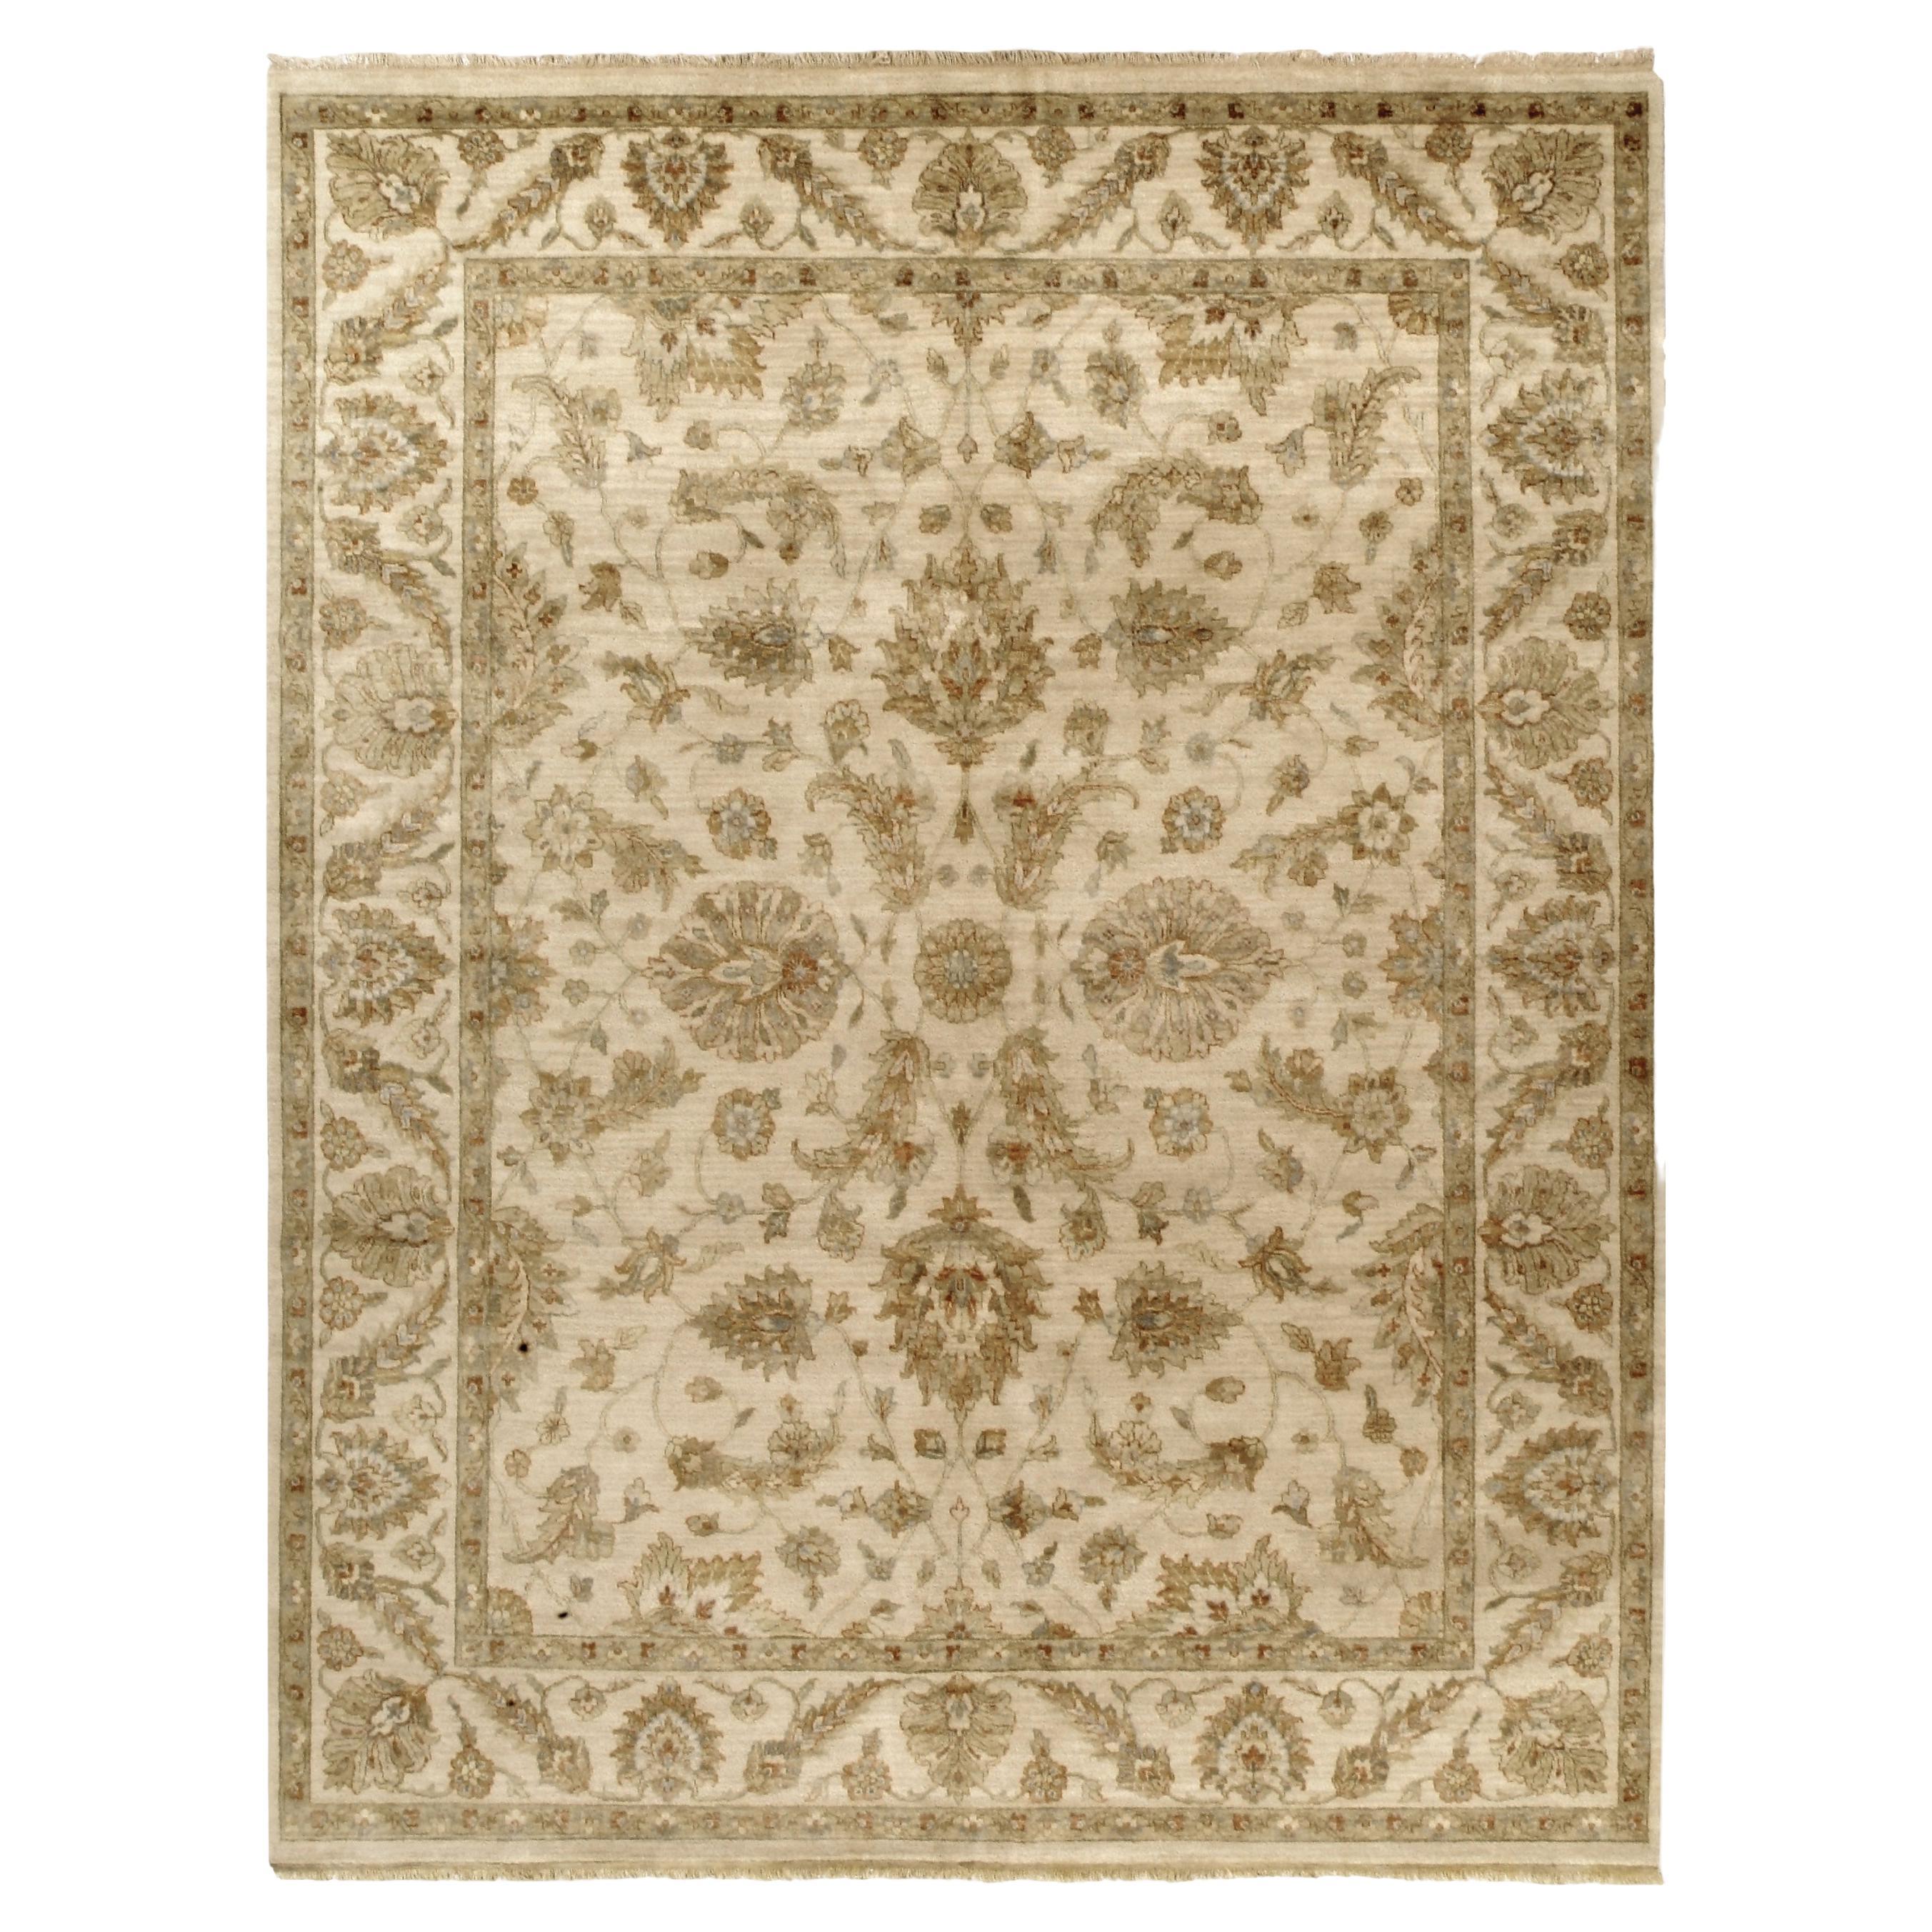 Luxury Traditional Hand-Knotted Cream 12X24 Rug